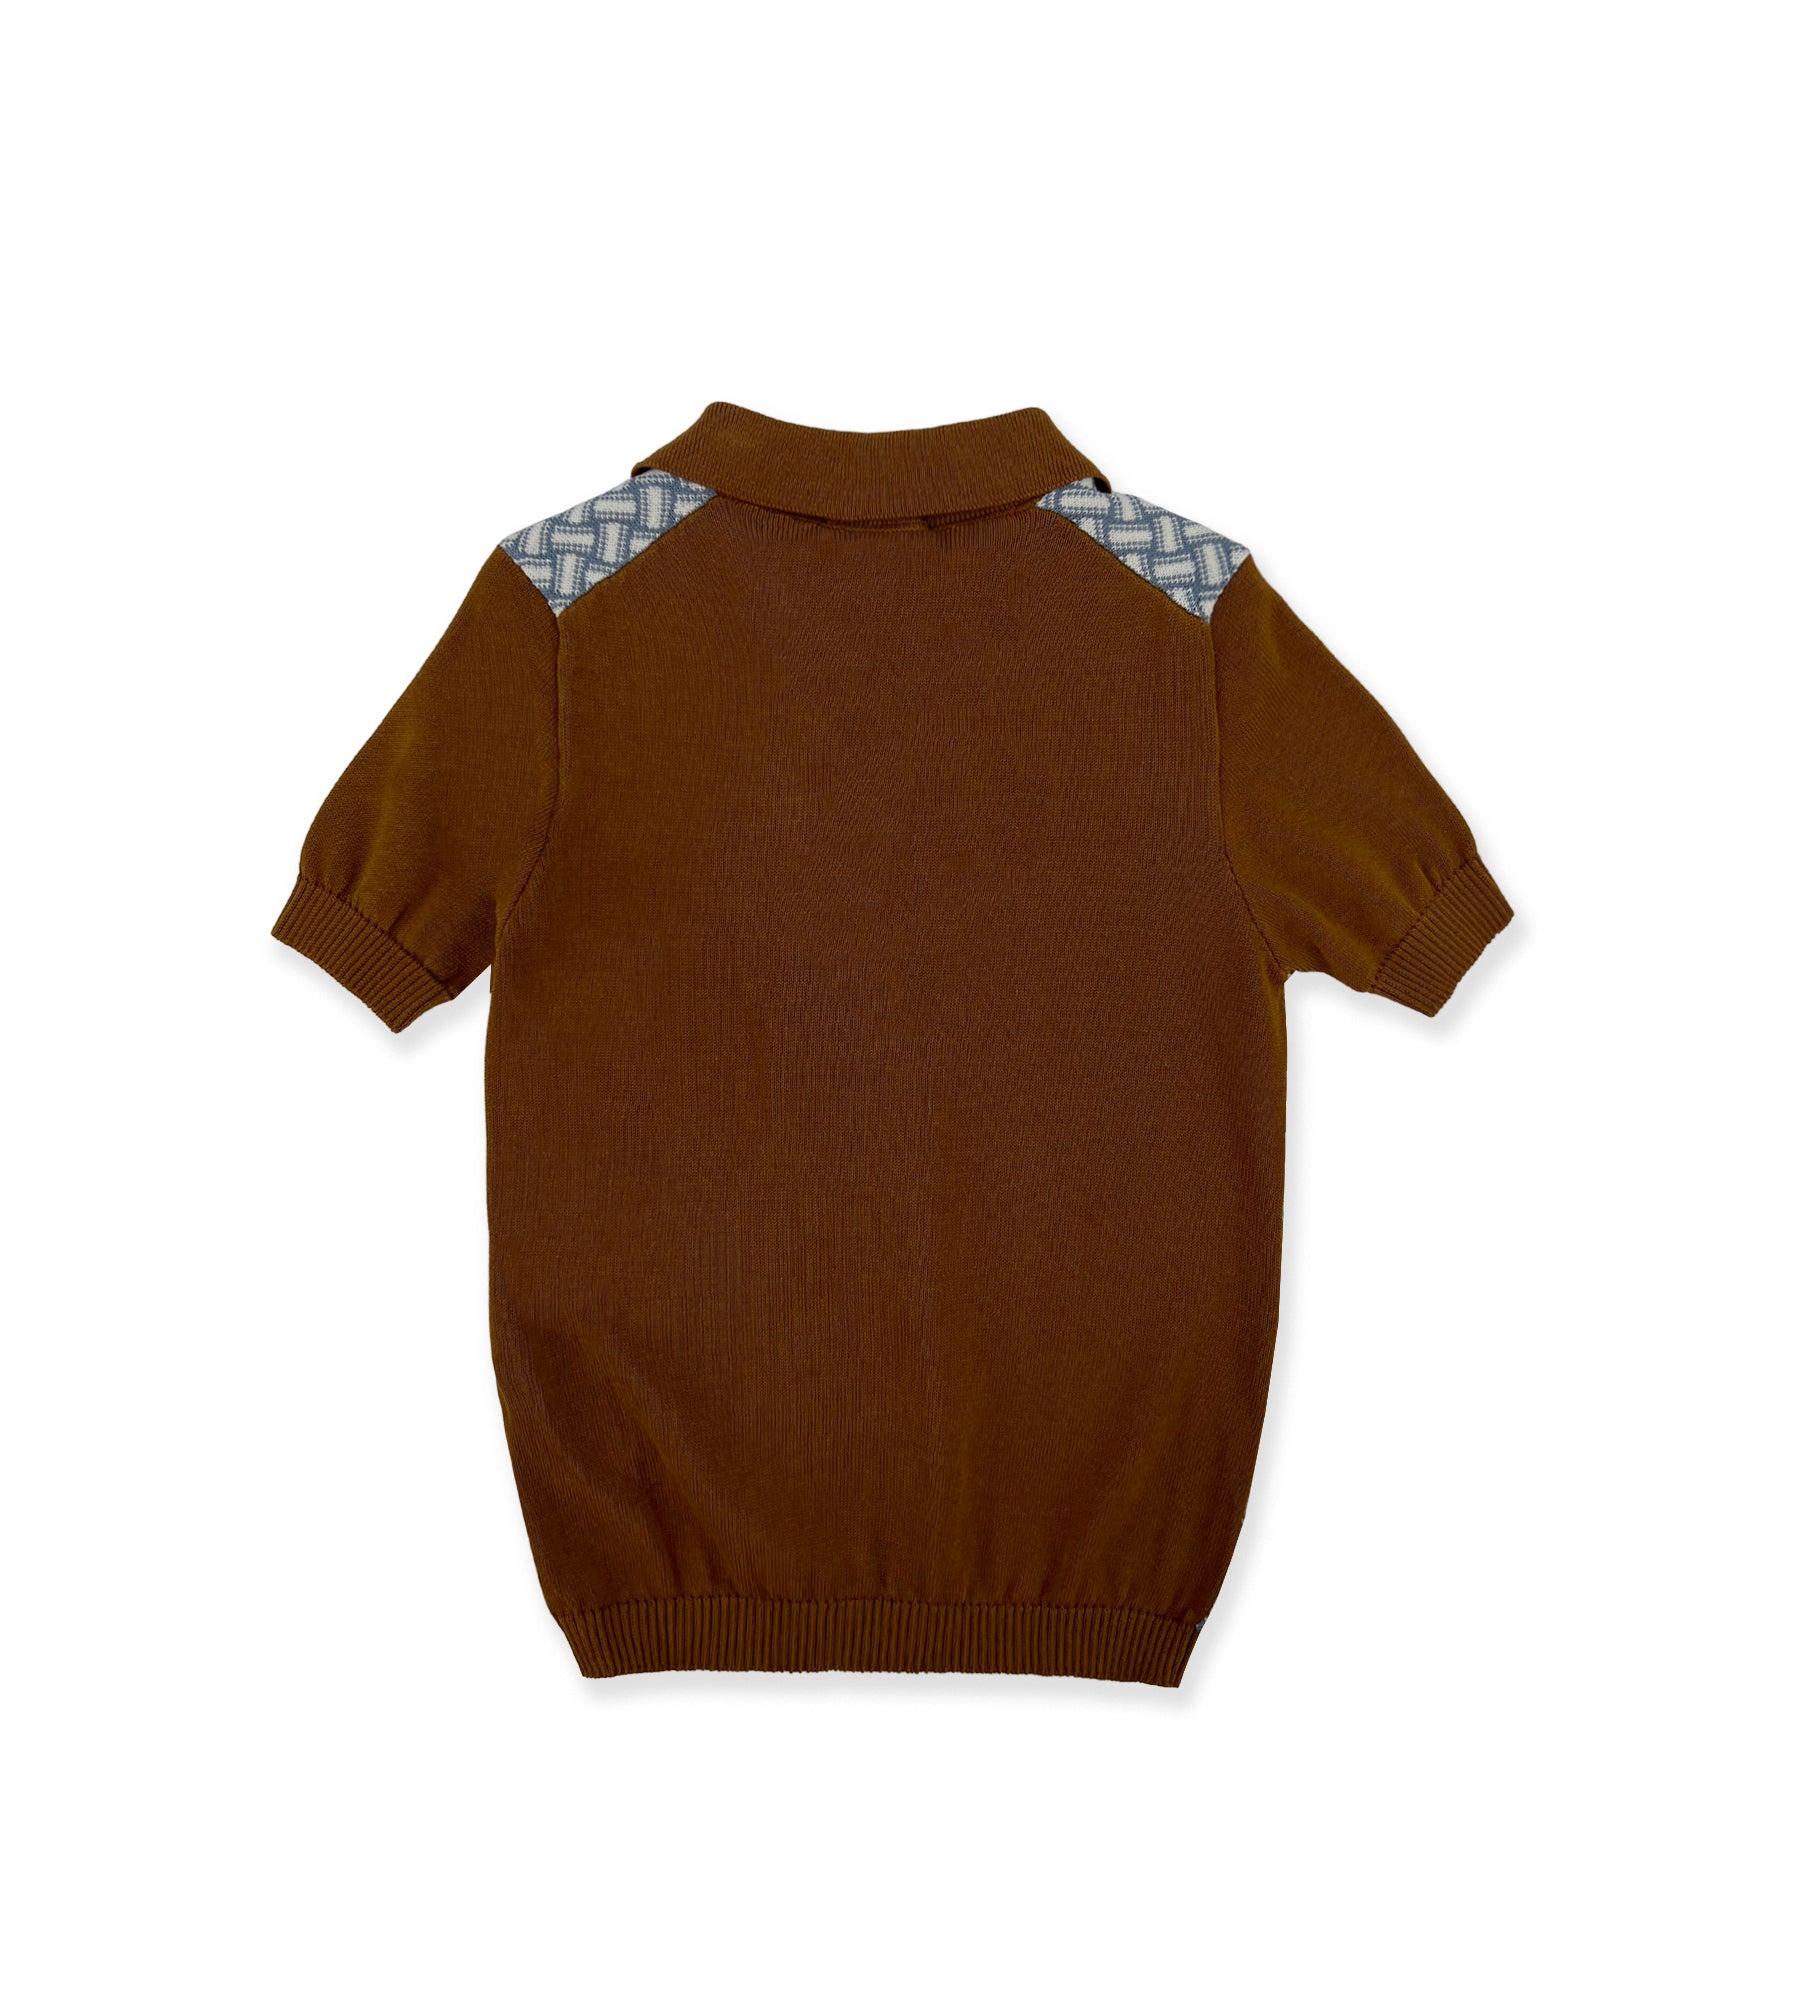 TOBACCO AND BLUE KNIT POLO SHIRT